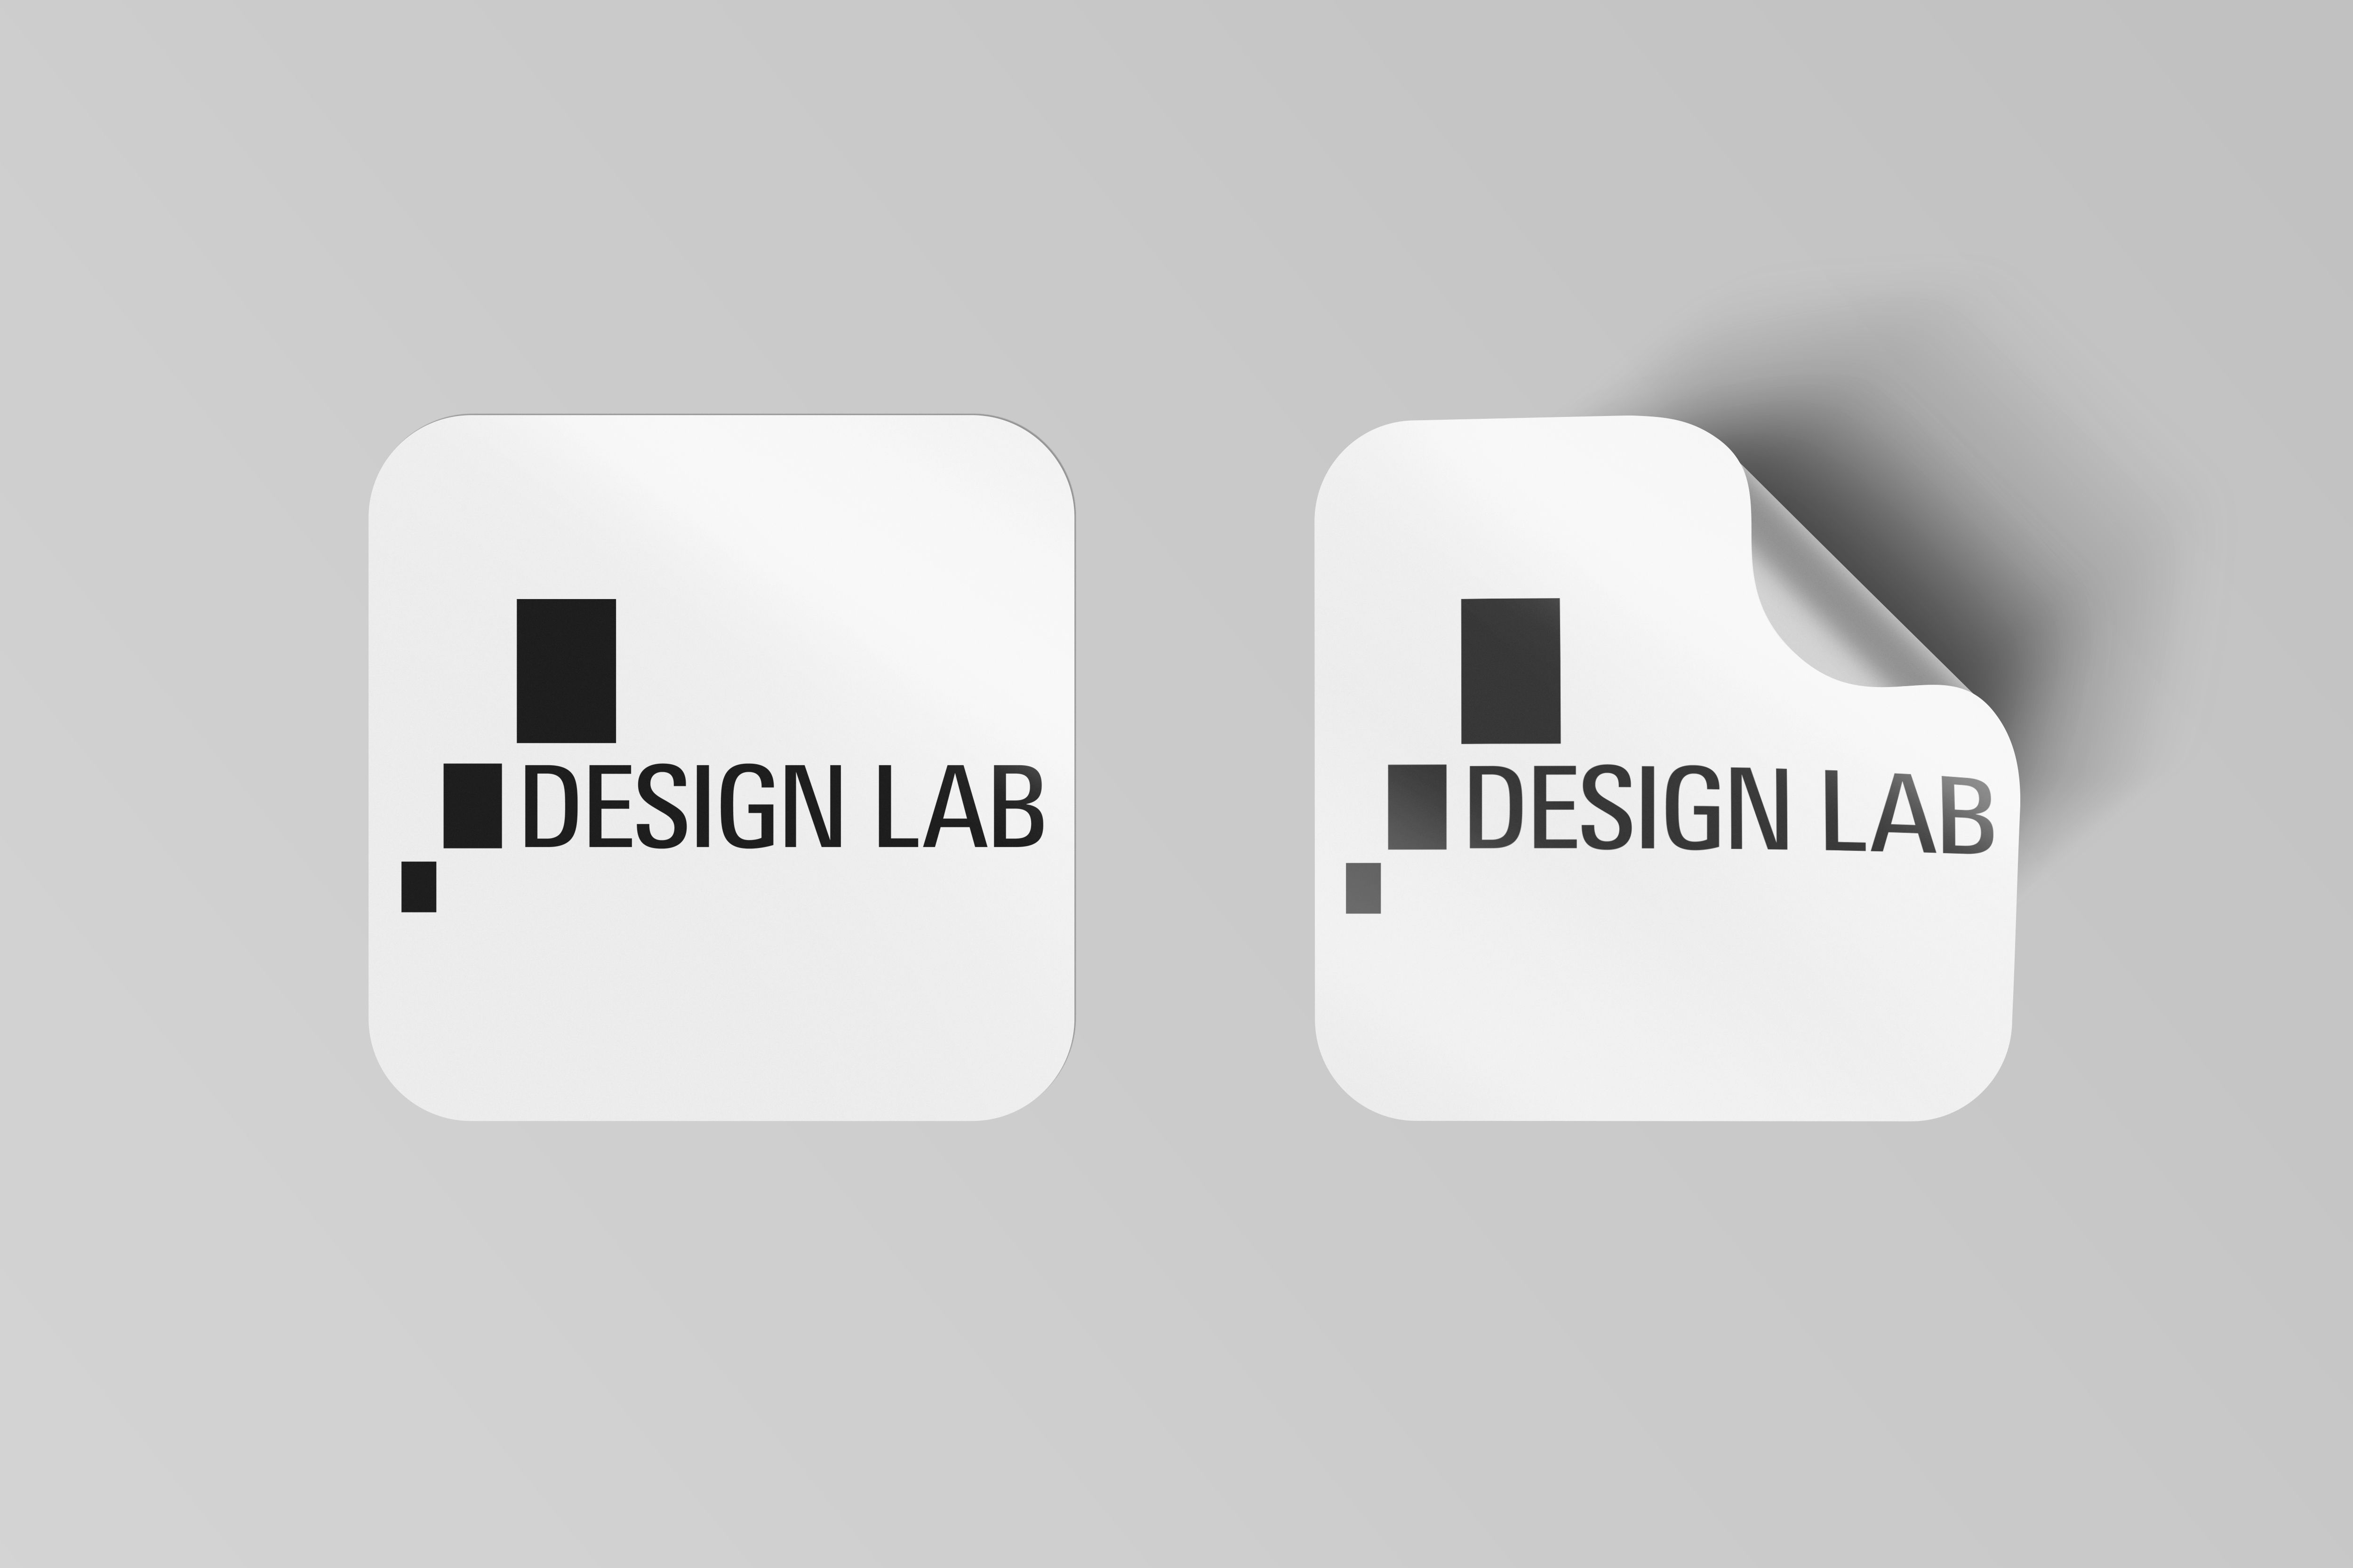 Project Design Lab Identity by Design Lab Students